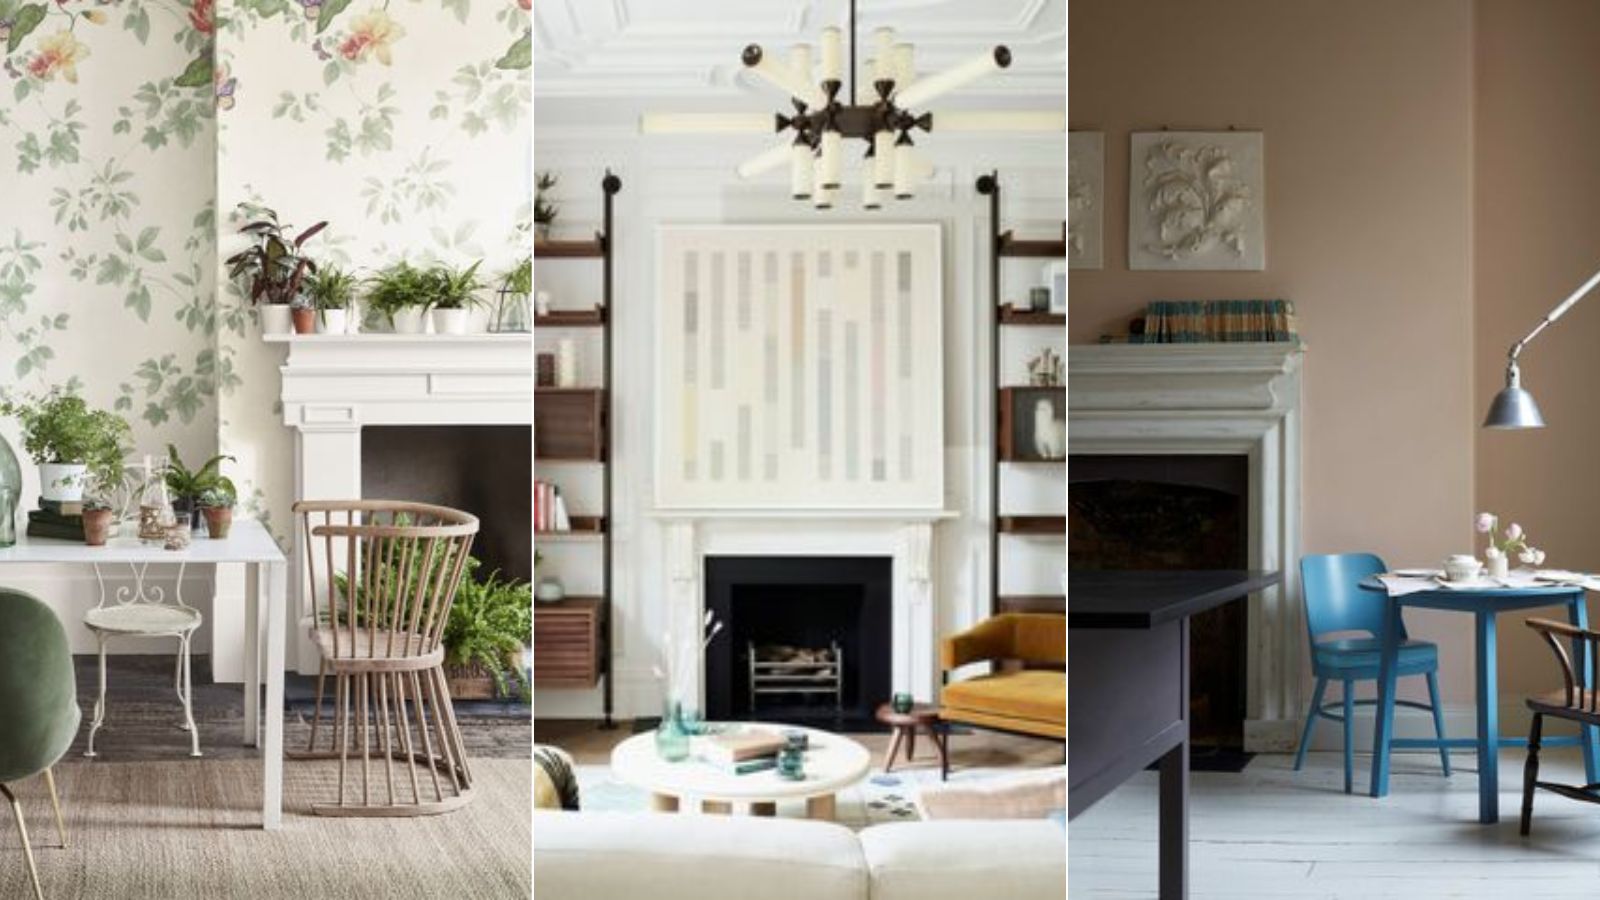 How to draft proof a fireplace: 8 expert-approved steps